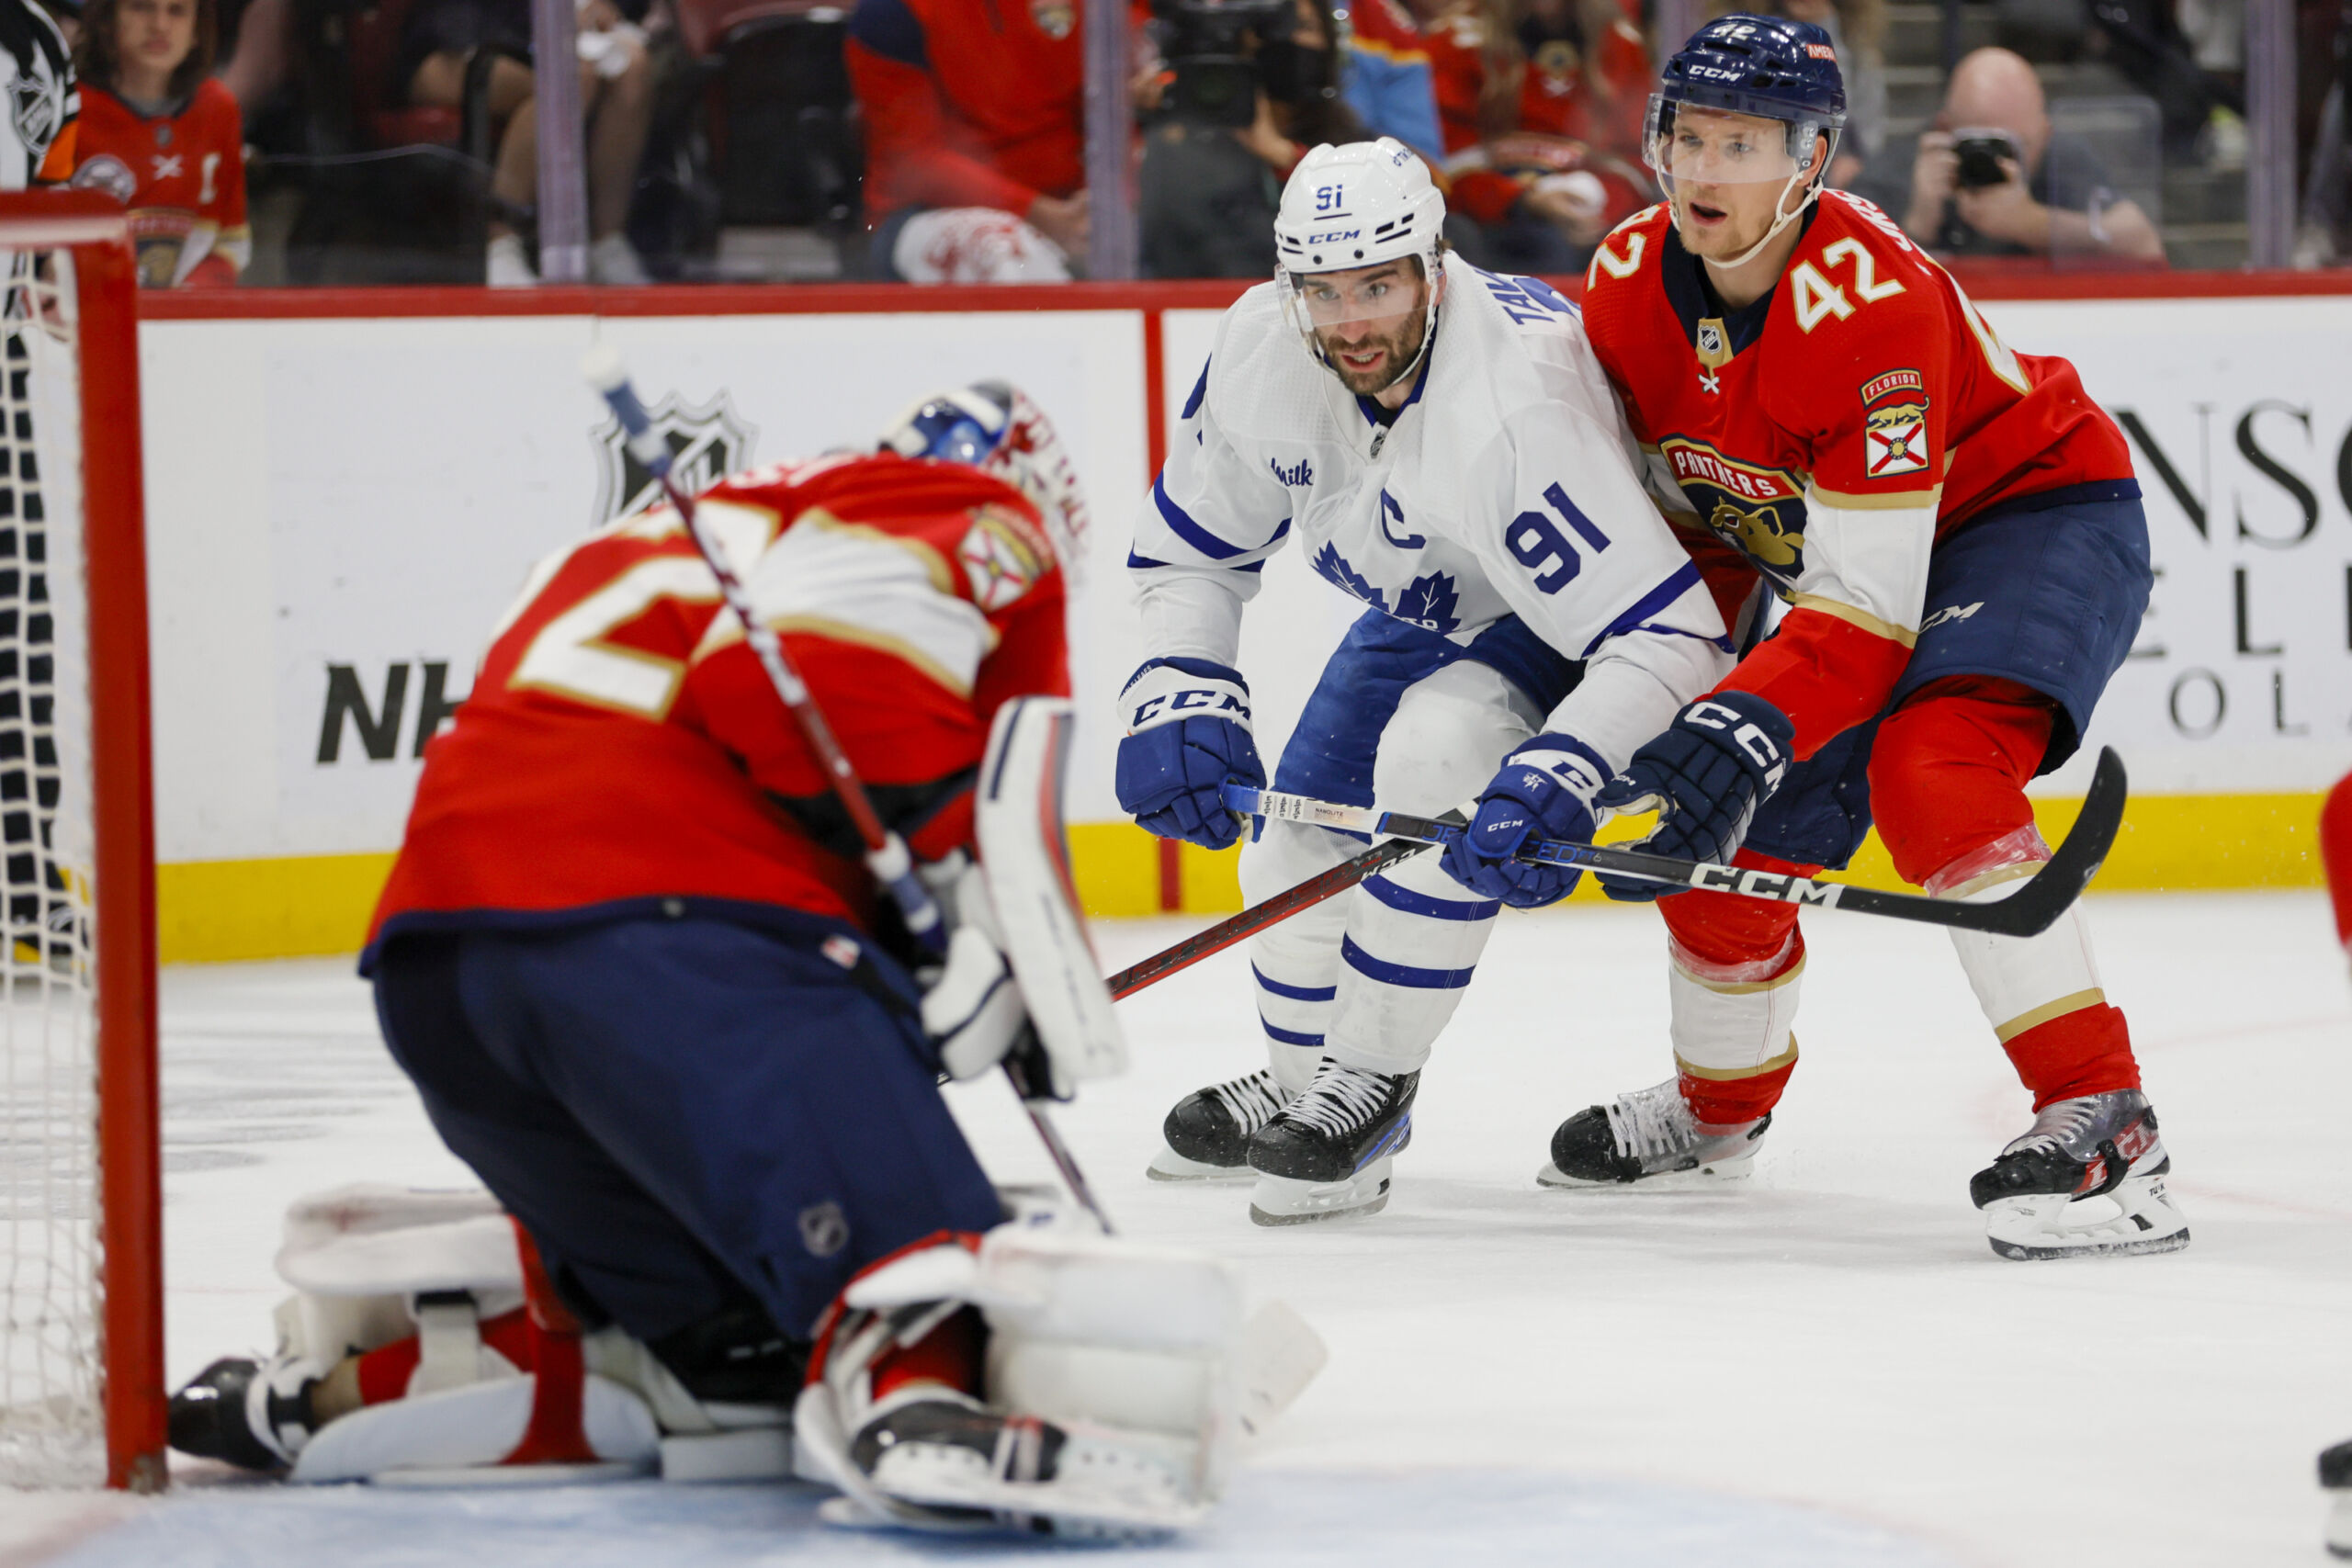 Leafs camp notes: Bertuzzi gets a shot with Matthews, Marner